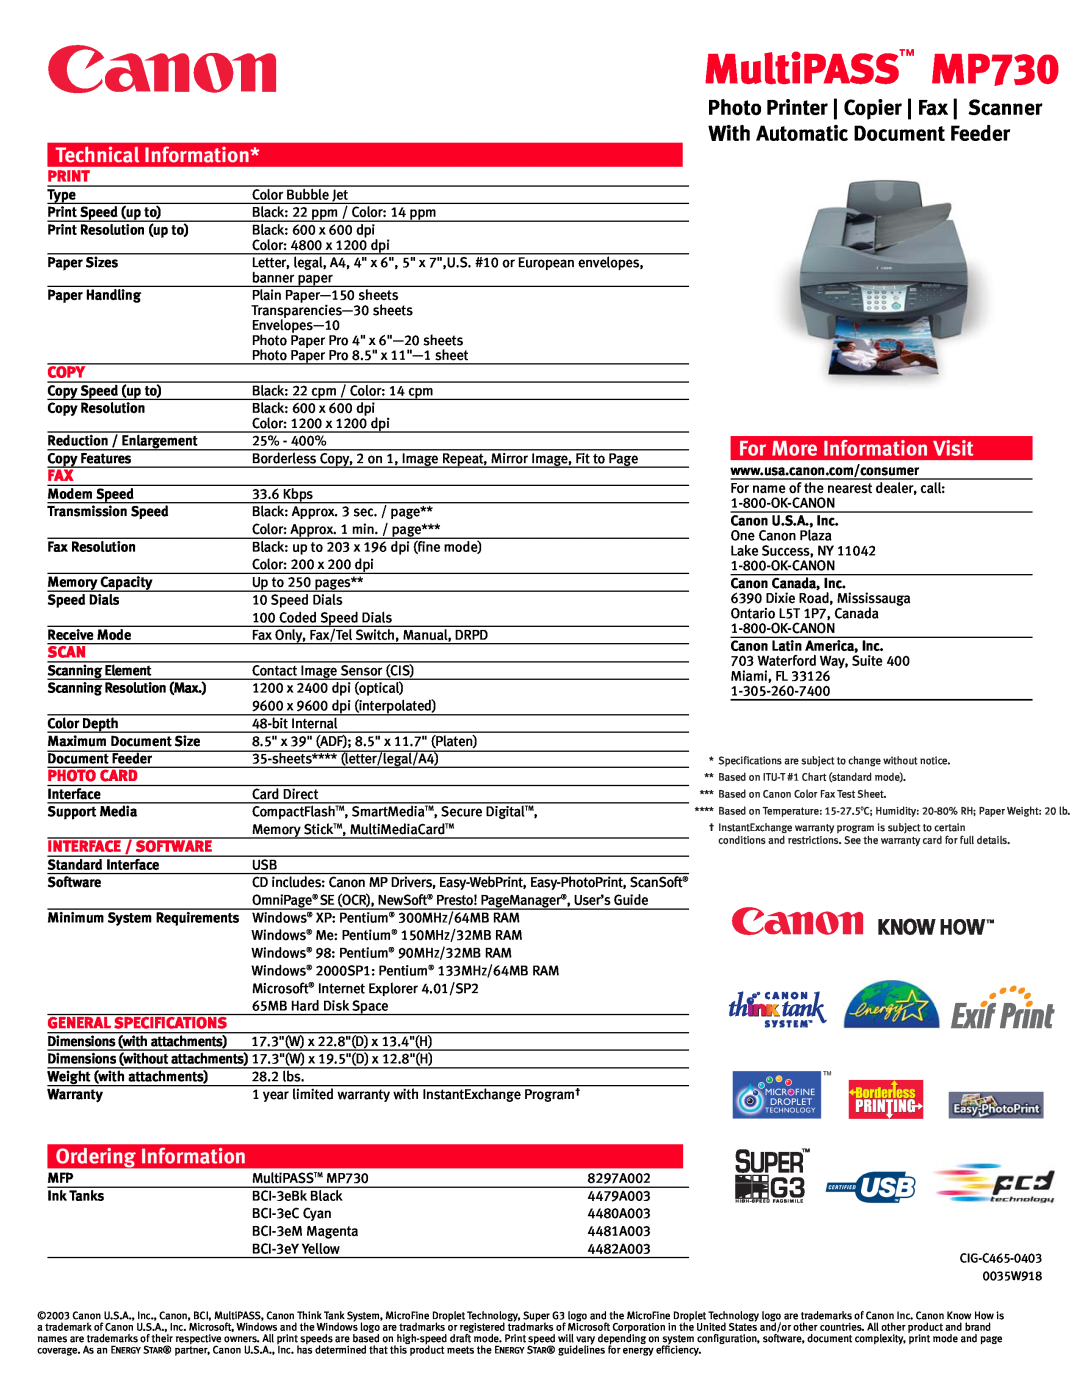 Canon manual MultiPASS MP730, Technical Information, For More Information Visit, Ordering Information, Print, Copy, Scan 